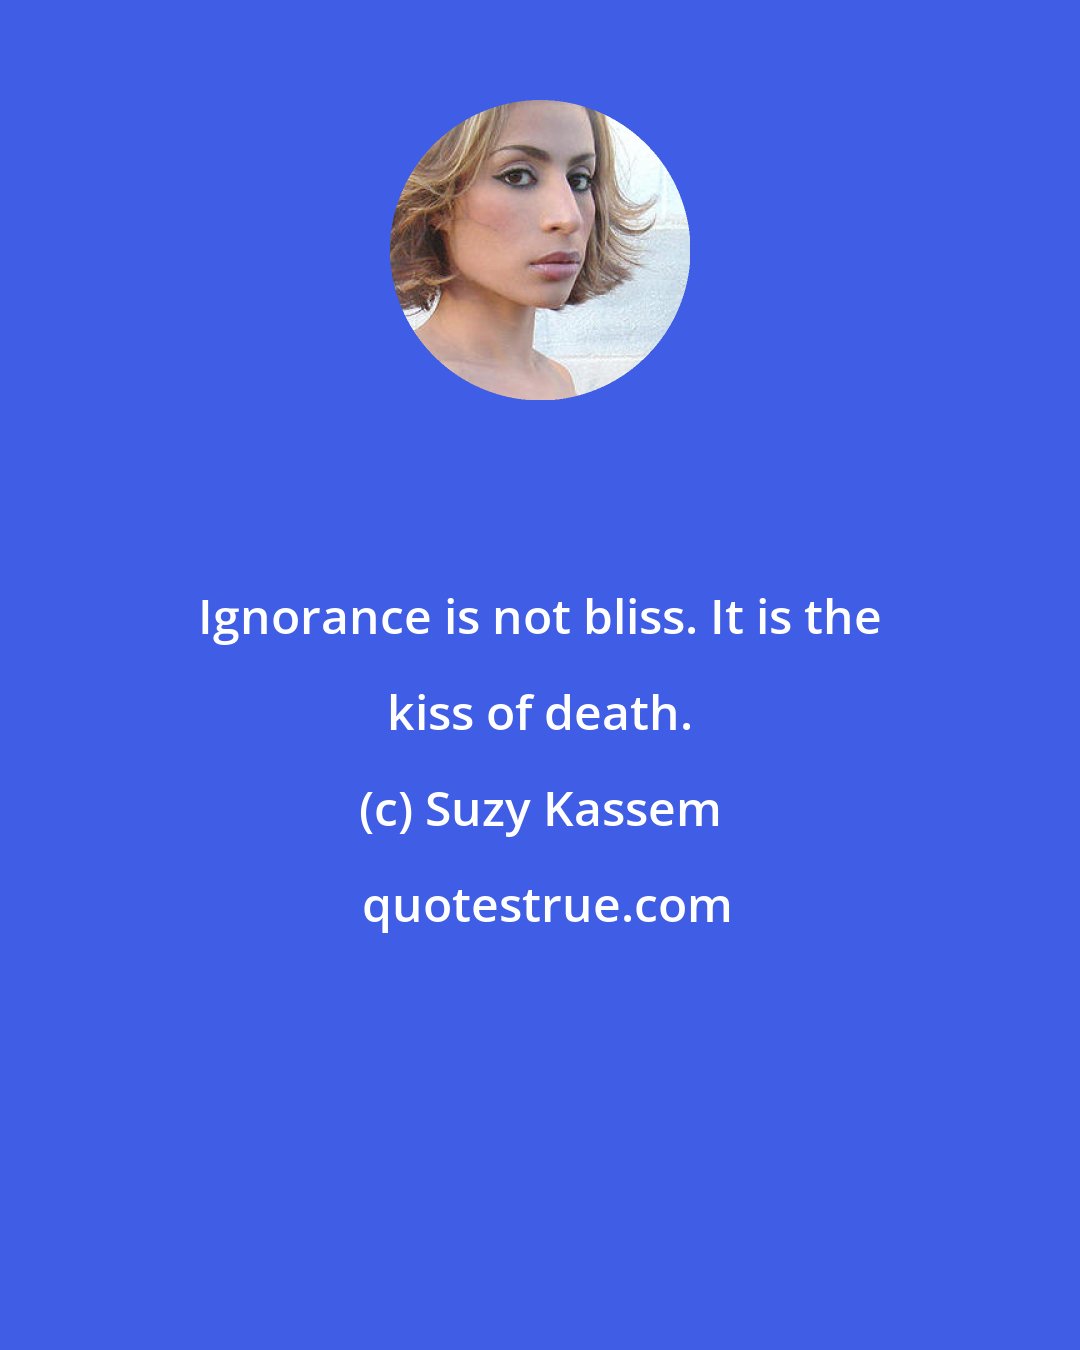 Suzy Kassem: Ignorance is not bliss. It is the kiss of death.